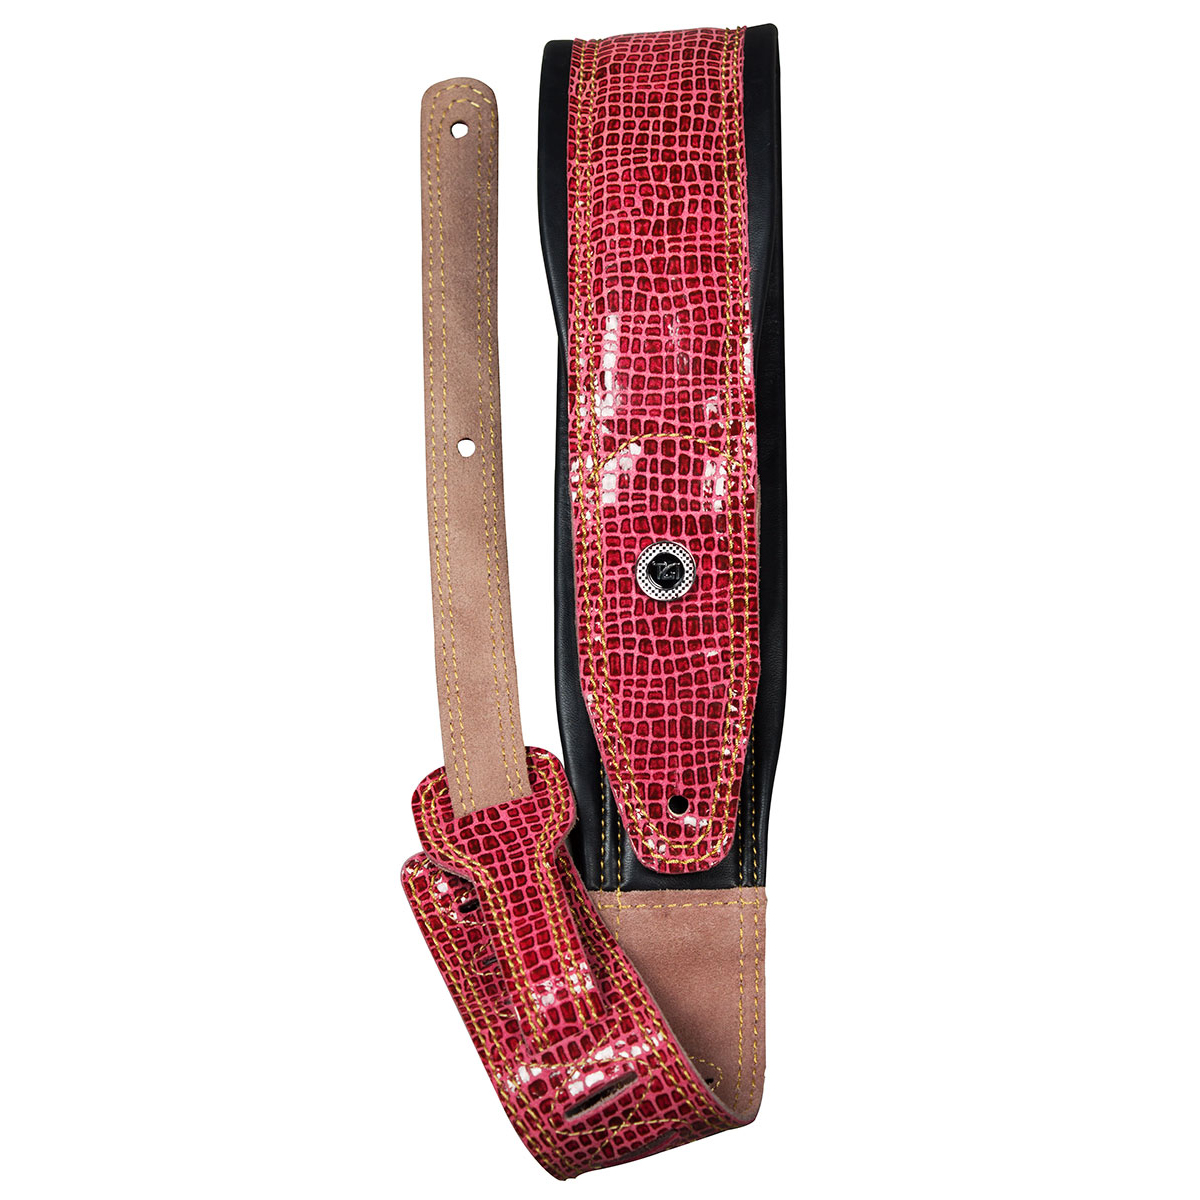 TGI Strap Padded Leather Red Skin Effect